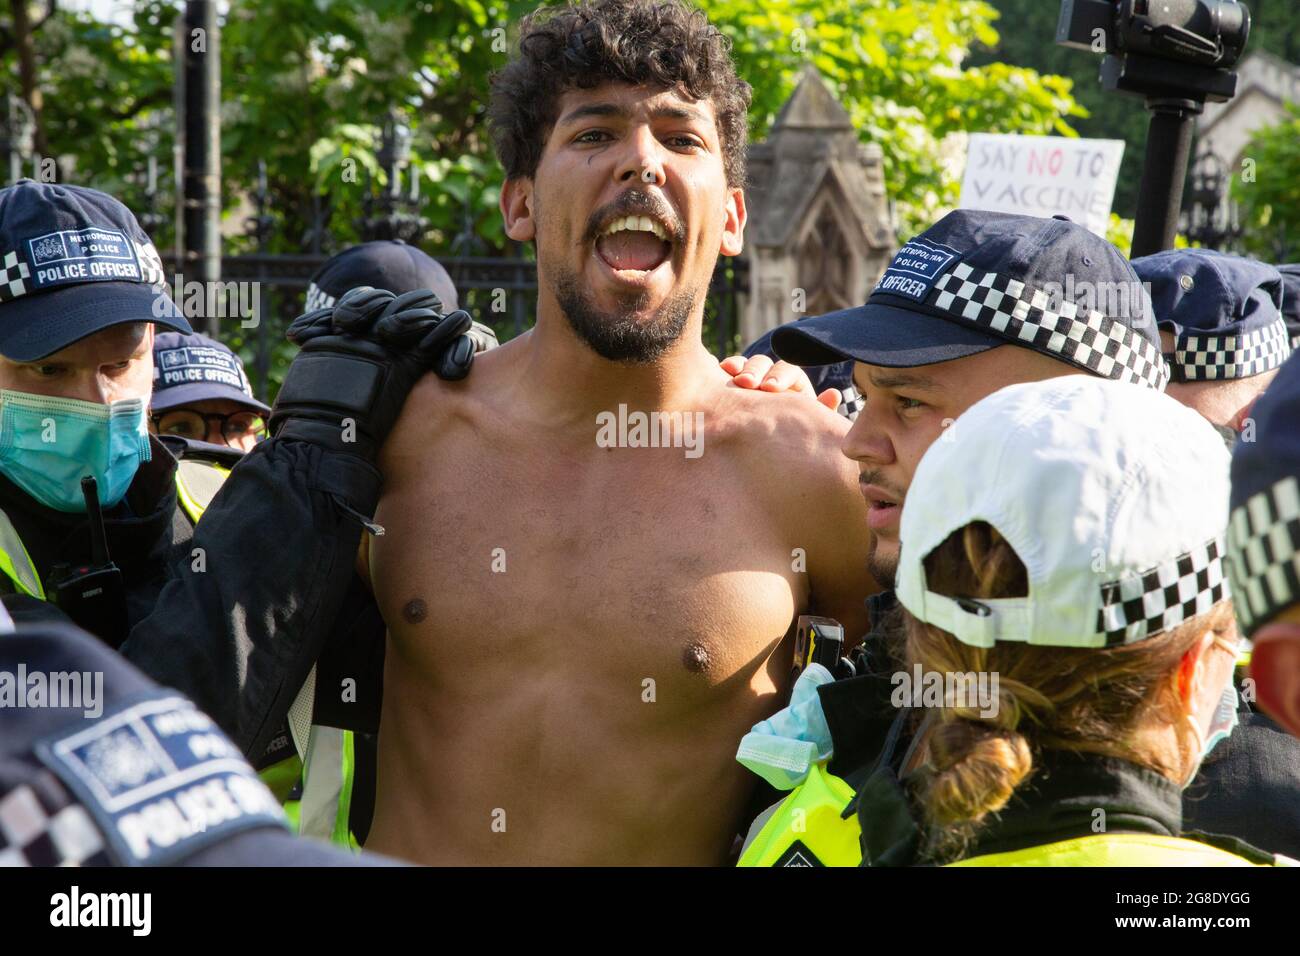 London, UK. 19th July, 2021. A protester is arrested after clashing with police during an anti-vaccination protest.Anti-vaccination and anti-Covid restrictions demonstrators march to Parliament Square. They say the coronavirus pandemic is a hoax and protest against the idea of vaccine passports. (Photo by Thabo Jaiyesimi/SOPA Images/Sipa USA) Credit: Sipa USA/Alamy Live News Stock Photo